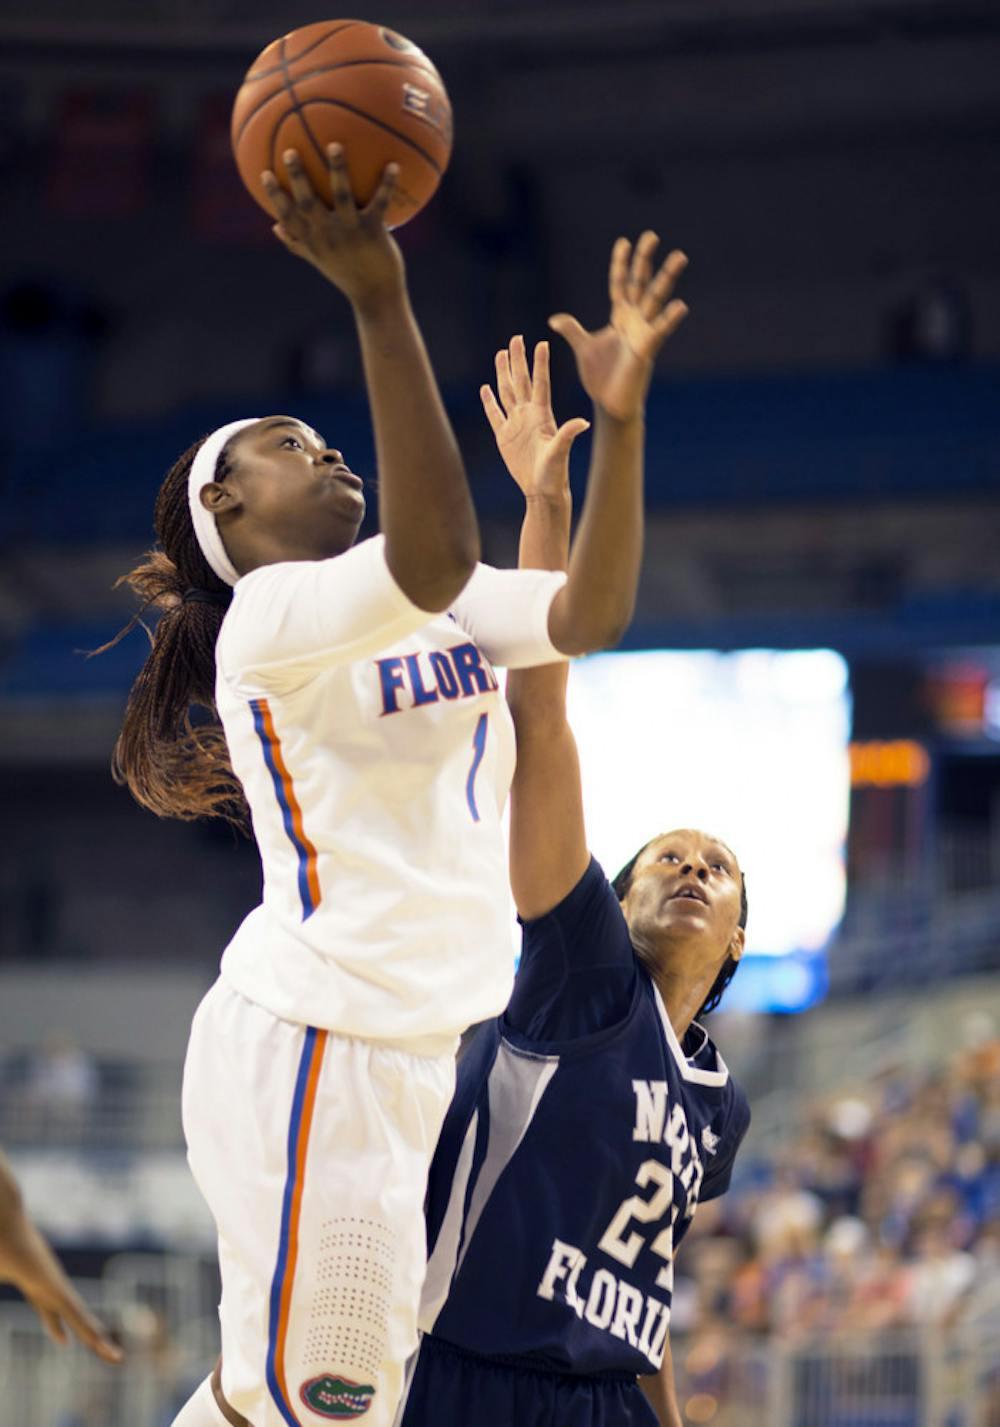 <p>Ronni Williams attempts a shot during Florida’s 88-77 win against North Florida on Nov. 10 in the O’Connell Center. Williams scored 19 points and grabbed 10 rebounds against No. 6 Kentucky on Sunday.</p>